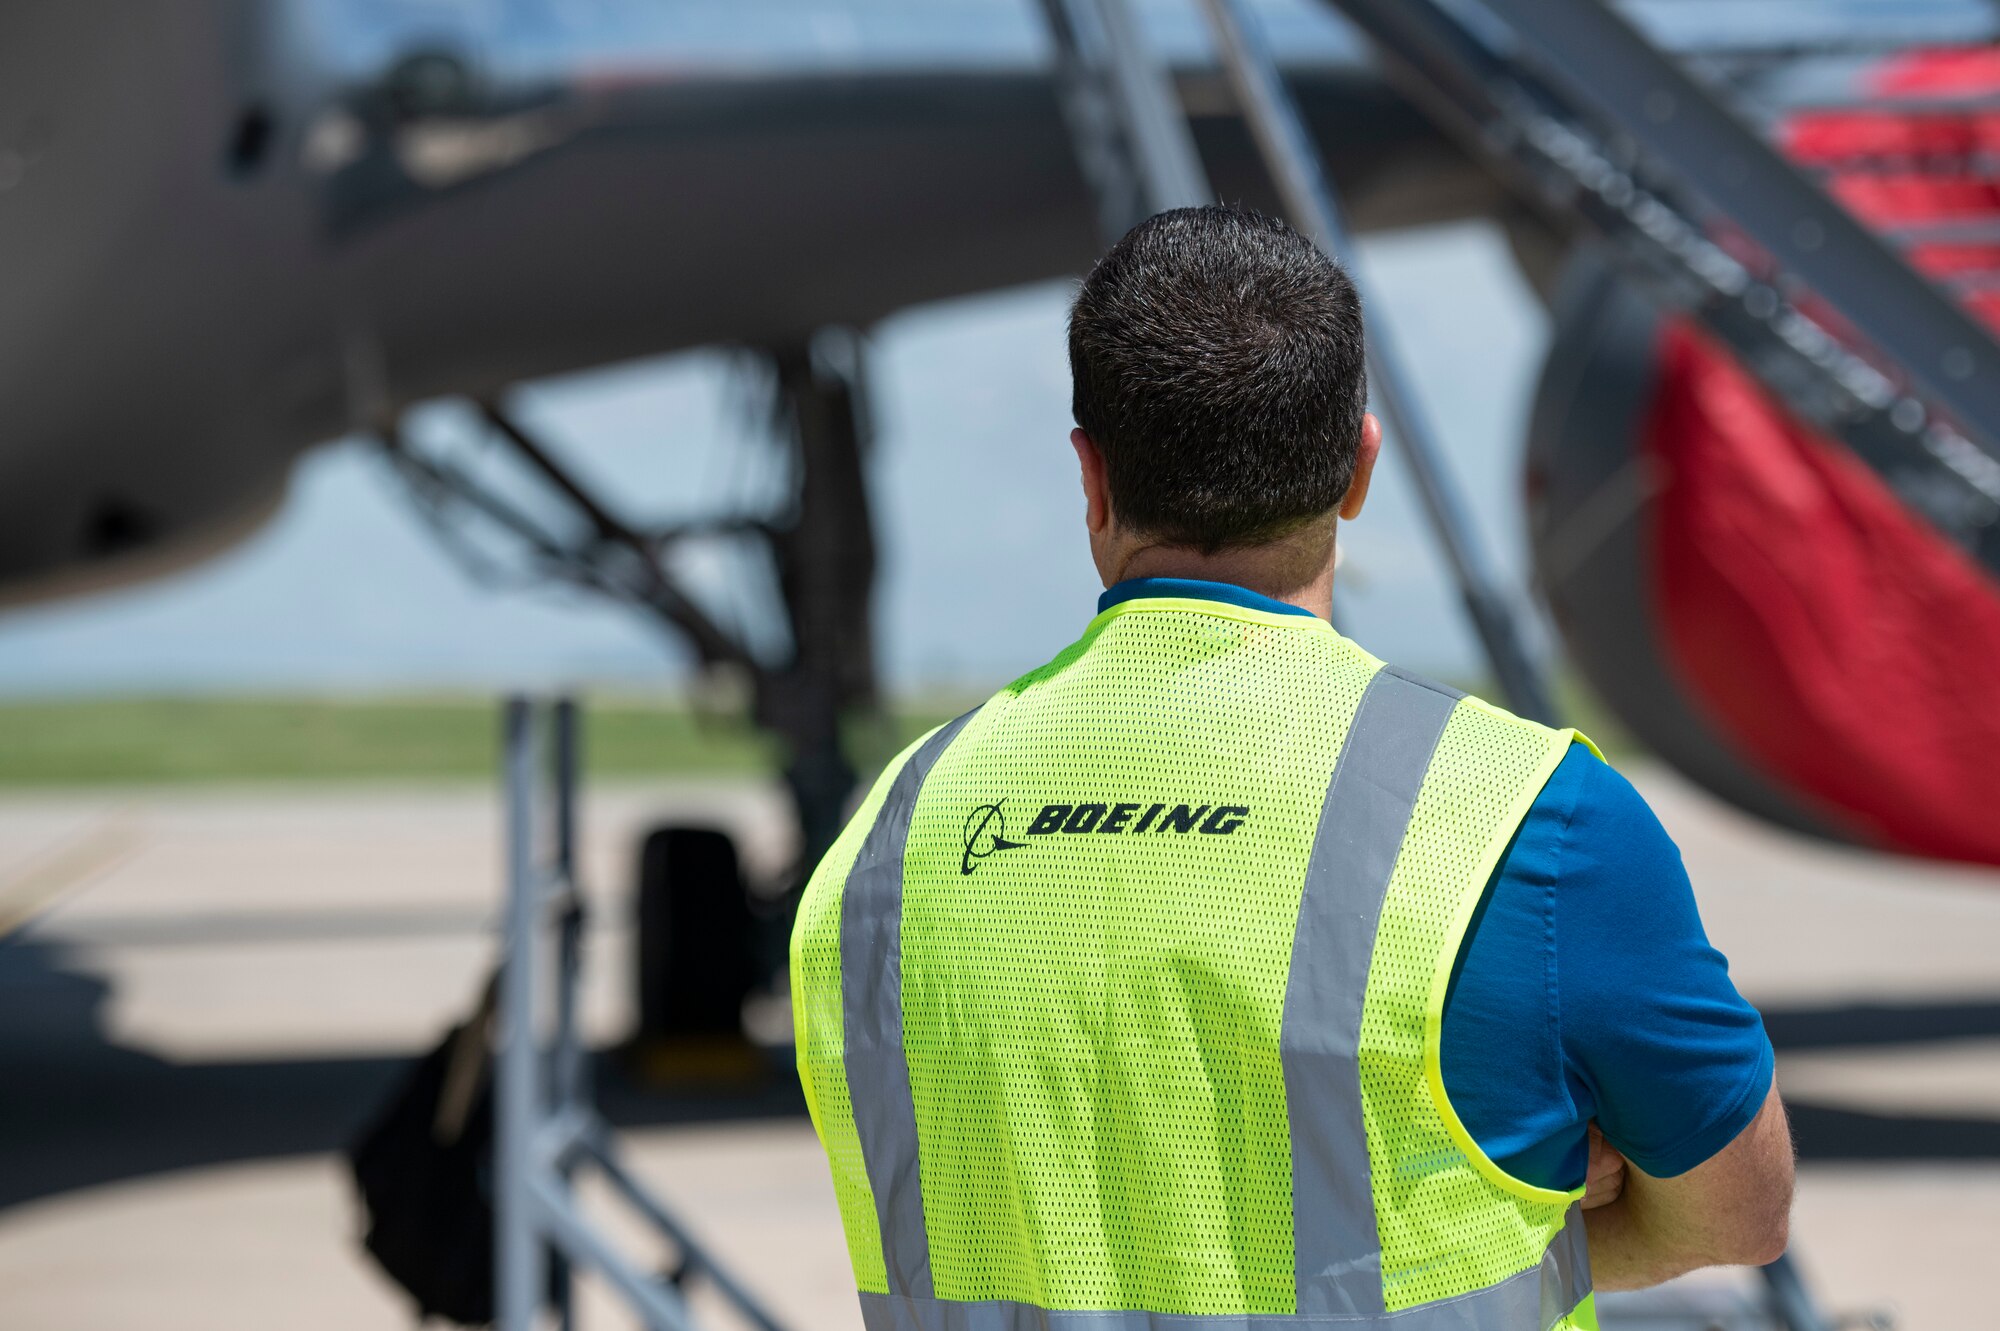 A Boeing employee looks at a newly-arrived KC-46 Pegasus, May 18, 2019, at Altus Air Force Base, Okla. The KC-46 is equipped with a refueling boom driven by new technology, allowing it to refuel almost any aircraft midflight. (U.S. Air Force photo by Airman 1st Class Breanna Klemm)